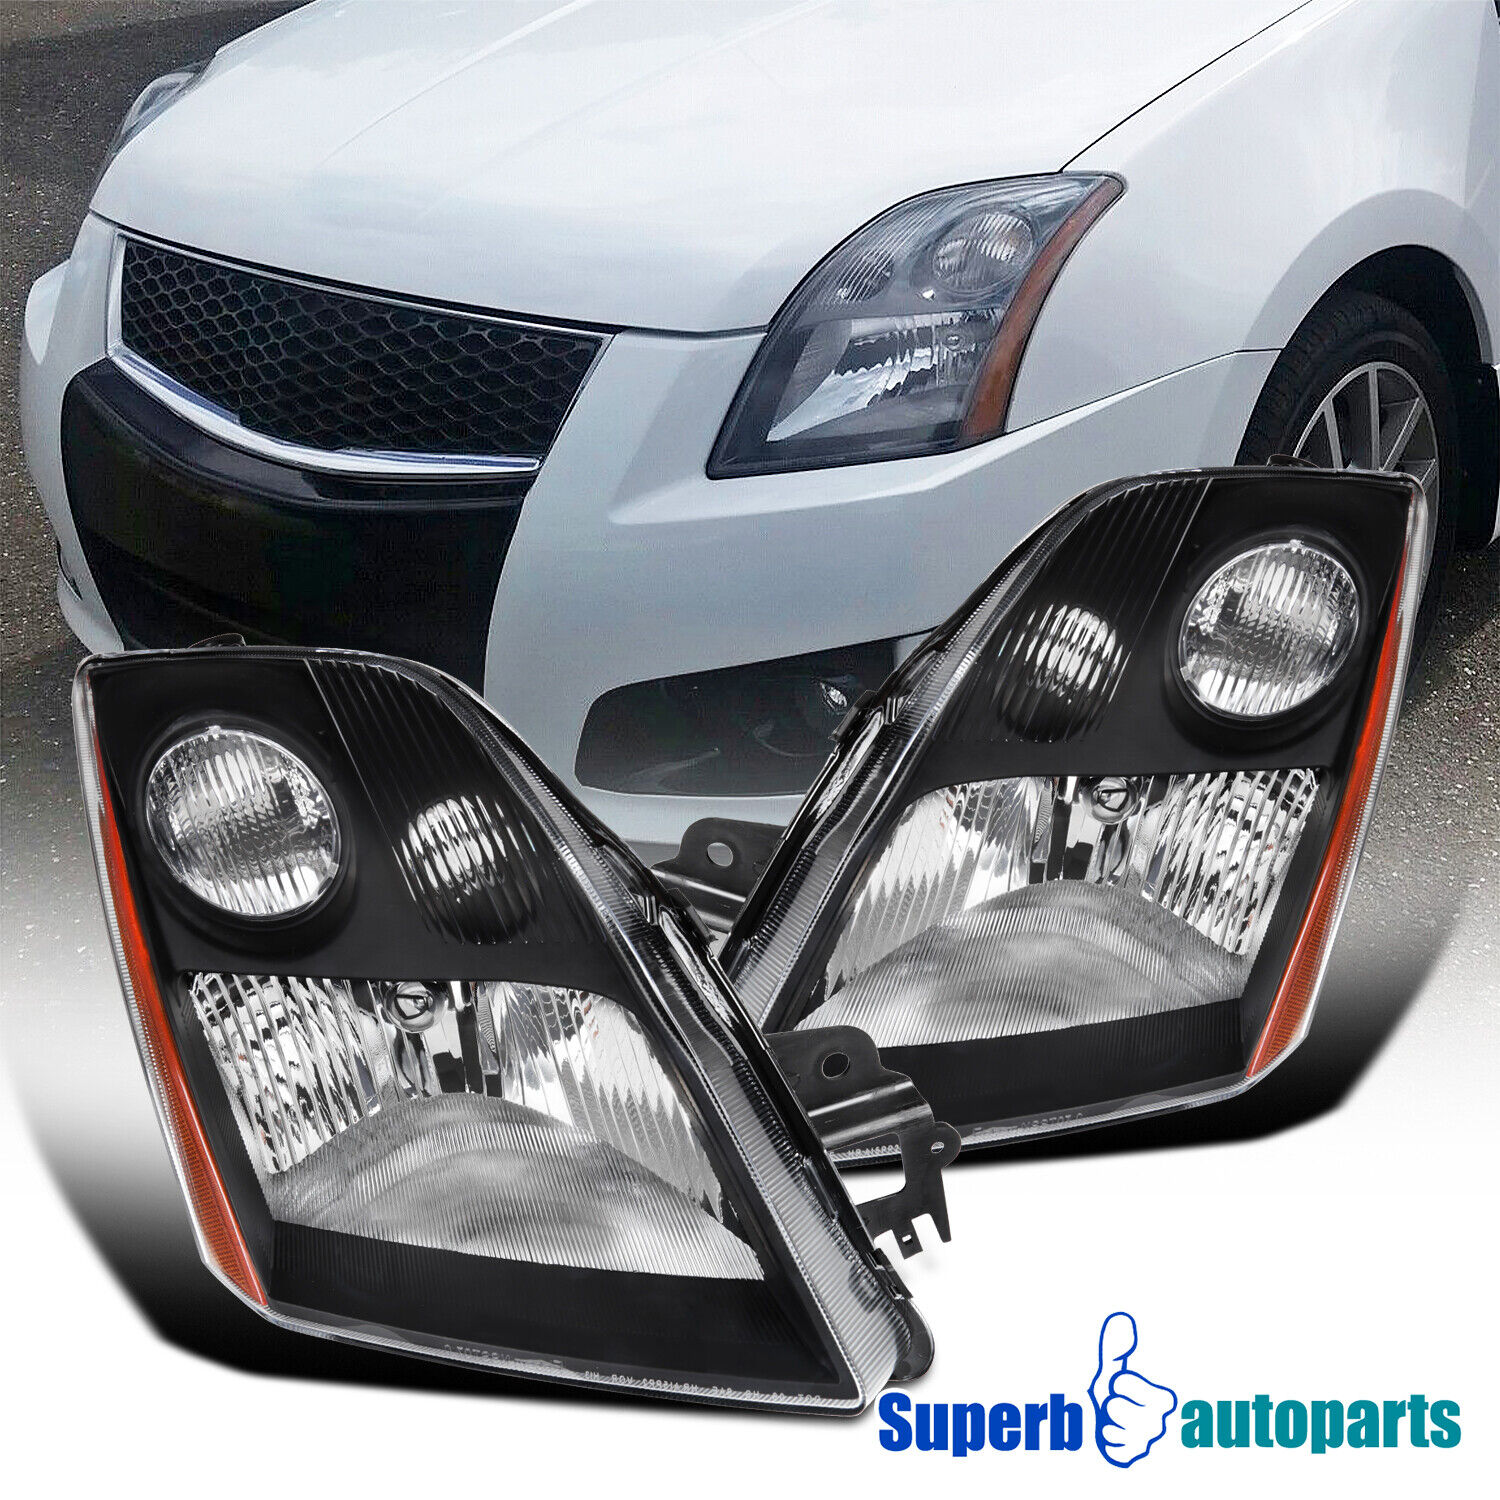 For 2007-2009 Sentra Black Headlights Replacement Lamps Pair Left+Right 07 08 09